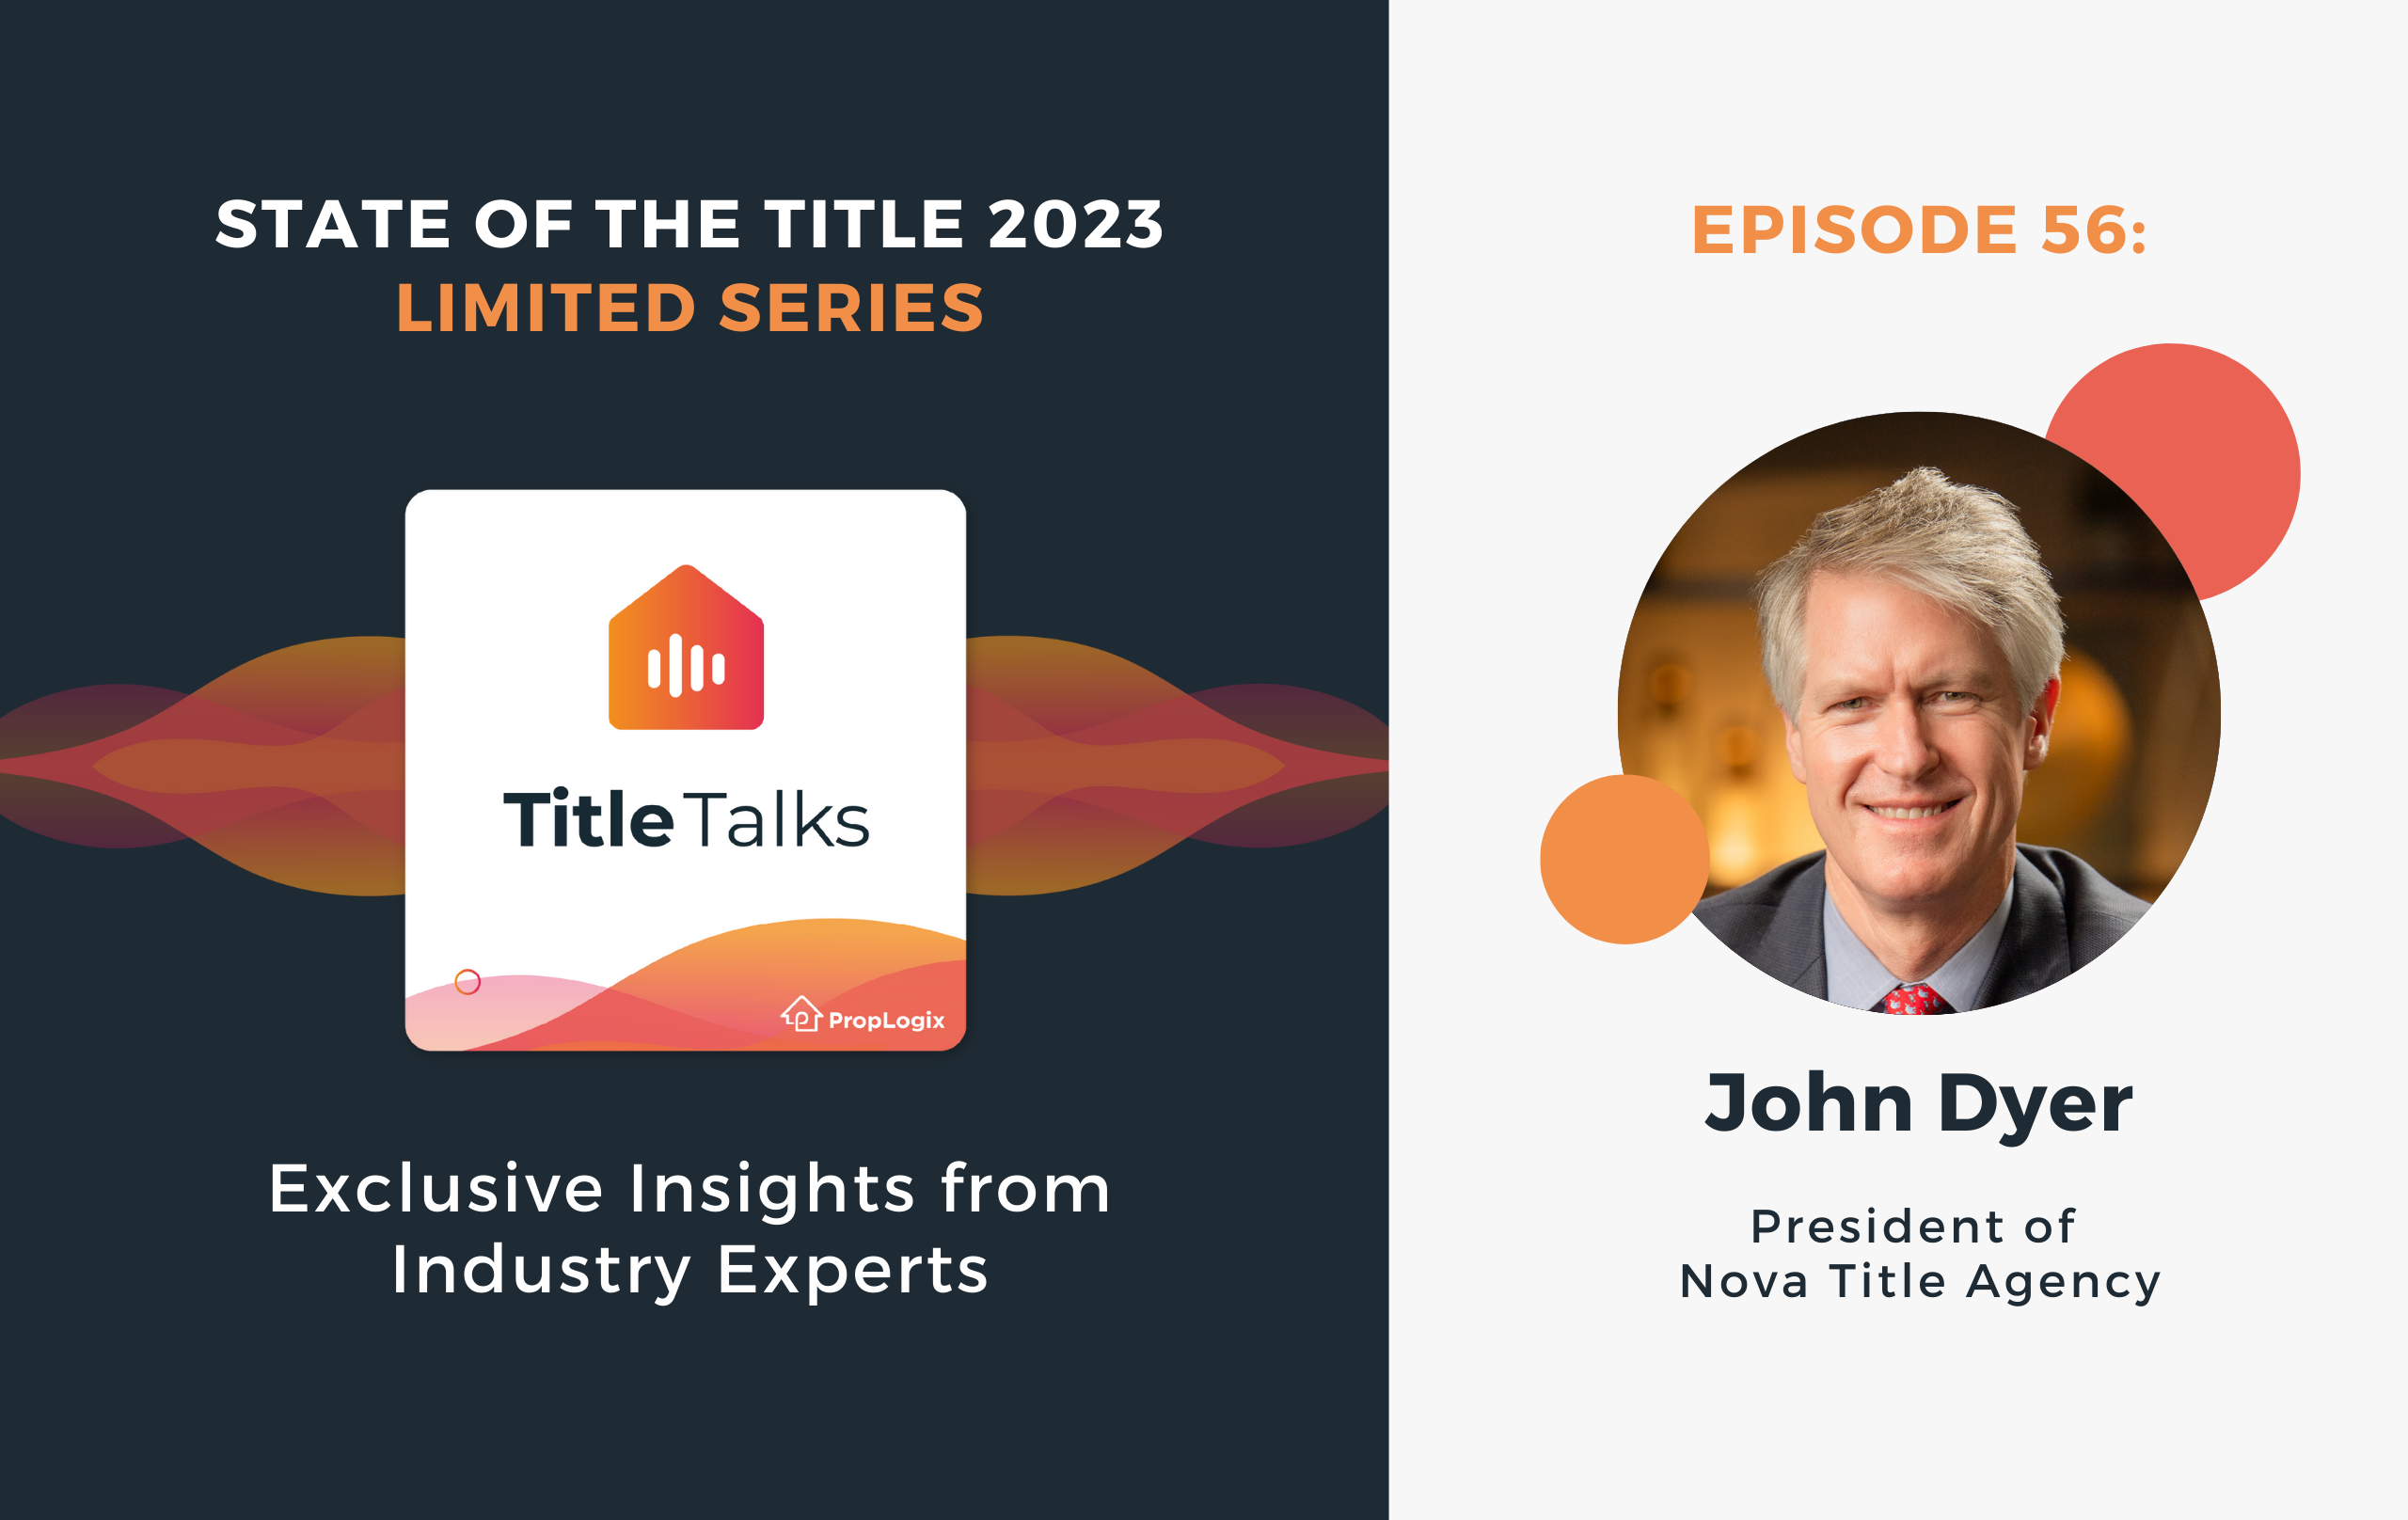 Ep. 56: John Dyer on the State of the Title Industry